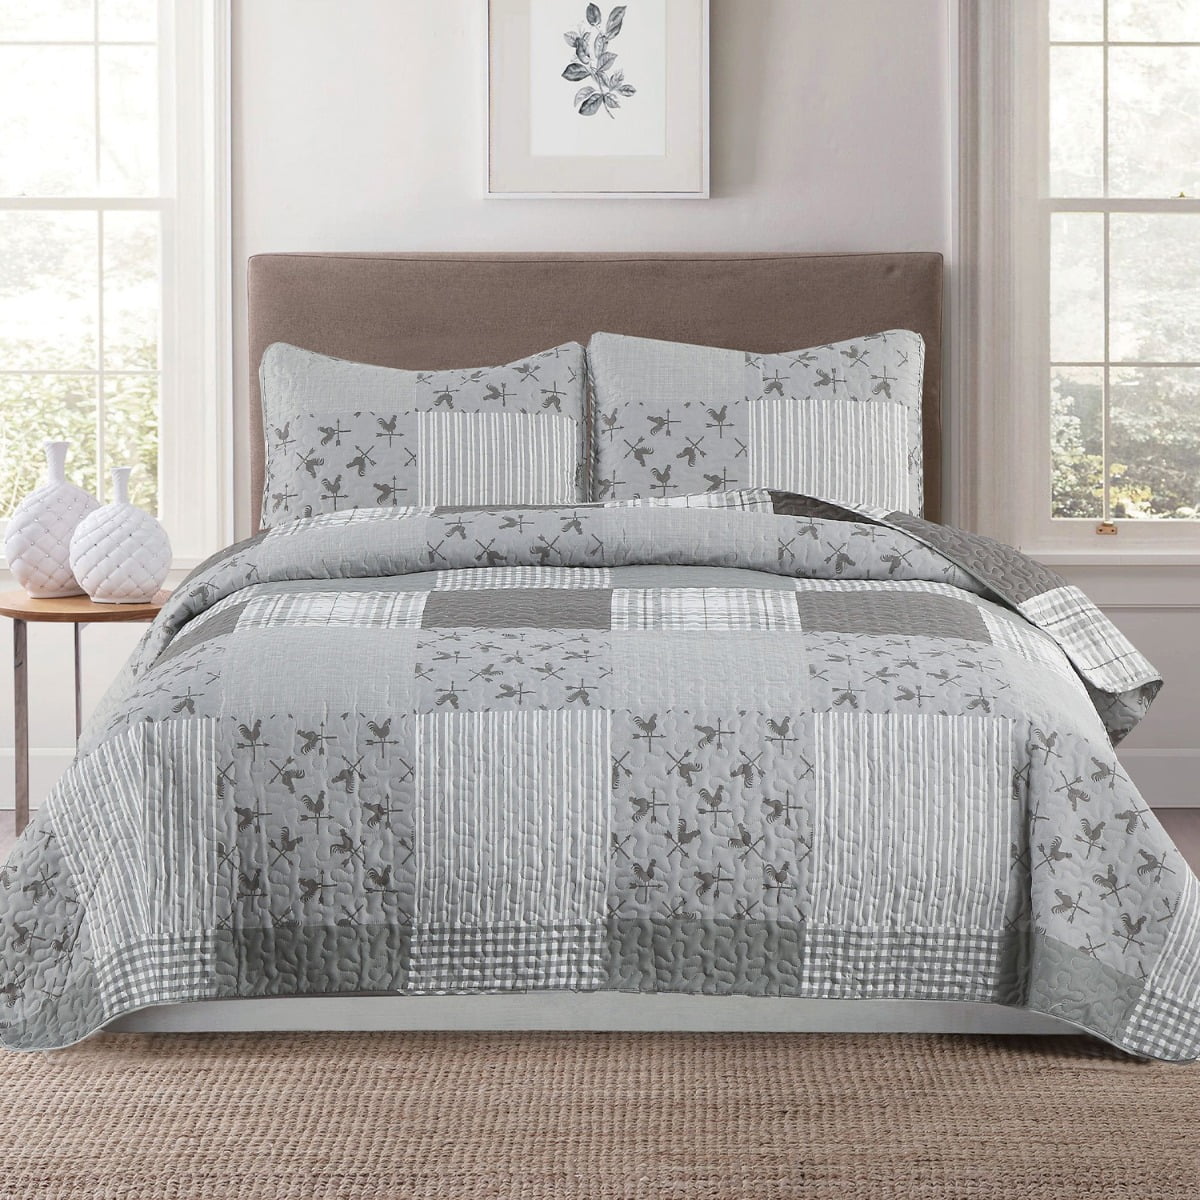 Rustic Farmhouse Patchwork King 3-Piece Quilt and Sham Bedding Set Coverlet  Bedspread, Grey White Plaid Stripes